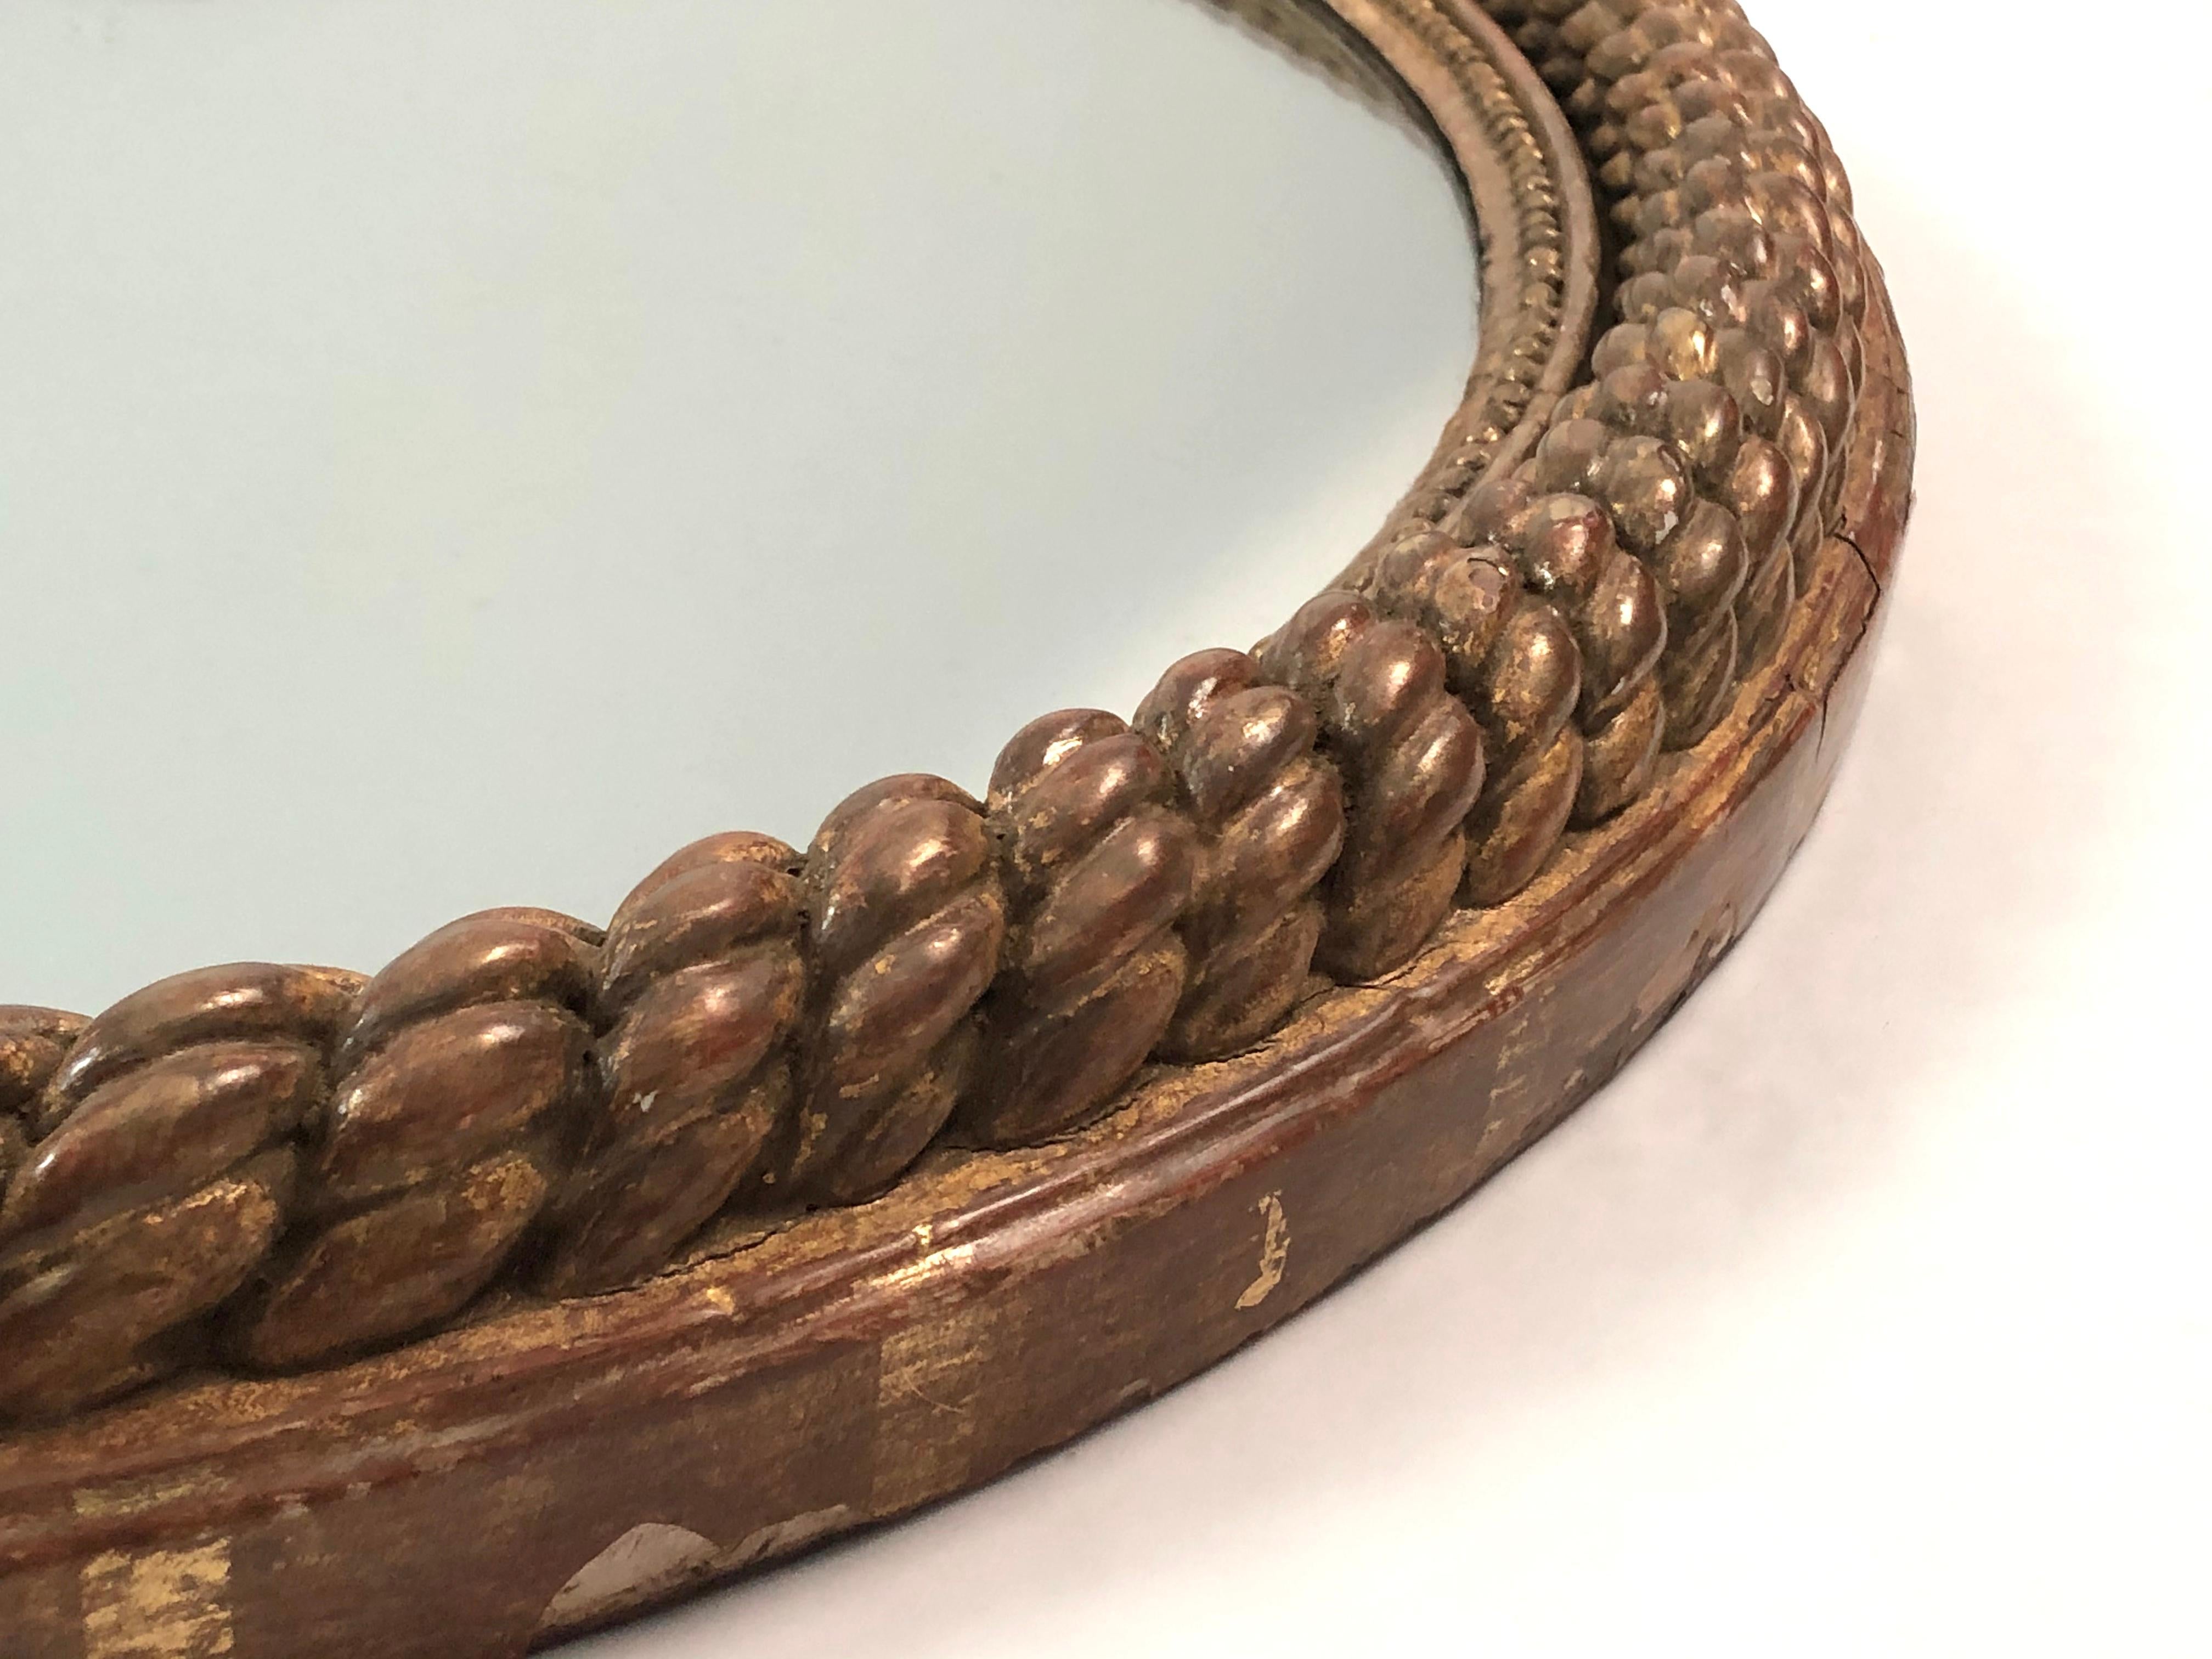 A beautifully detailed 19th century French oval giltwood mirror with deeply carved and gilded rope decoration around the perimeter, with a second smaller string of pearls border next to the original mirror glass.
Provenance: A William Hodgins